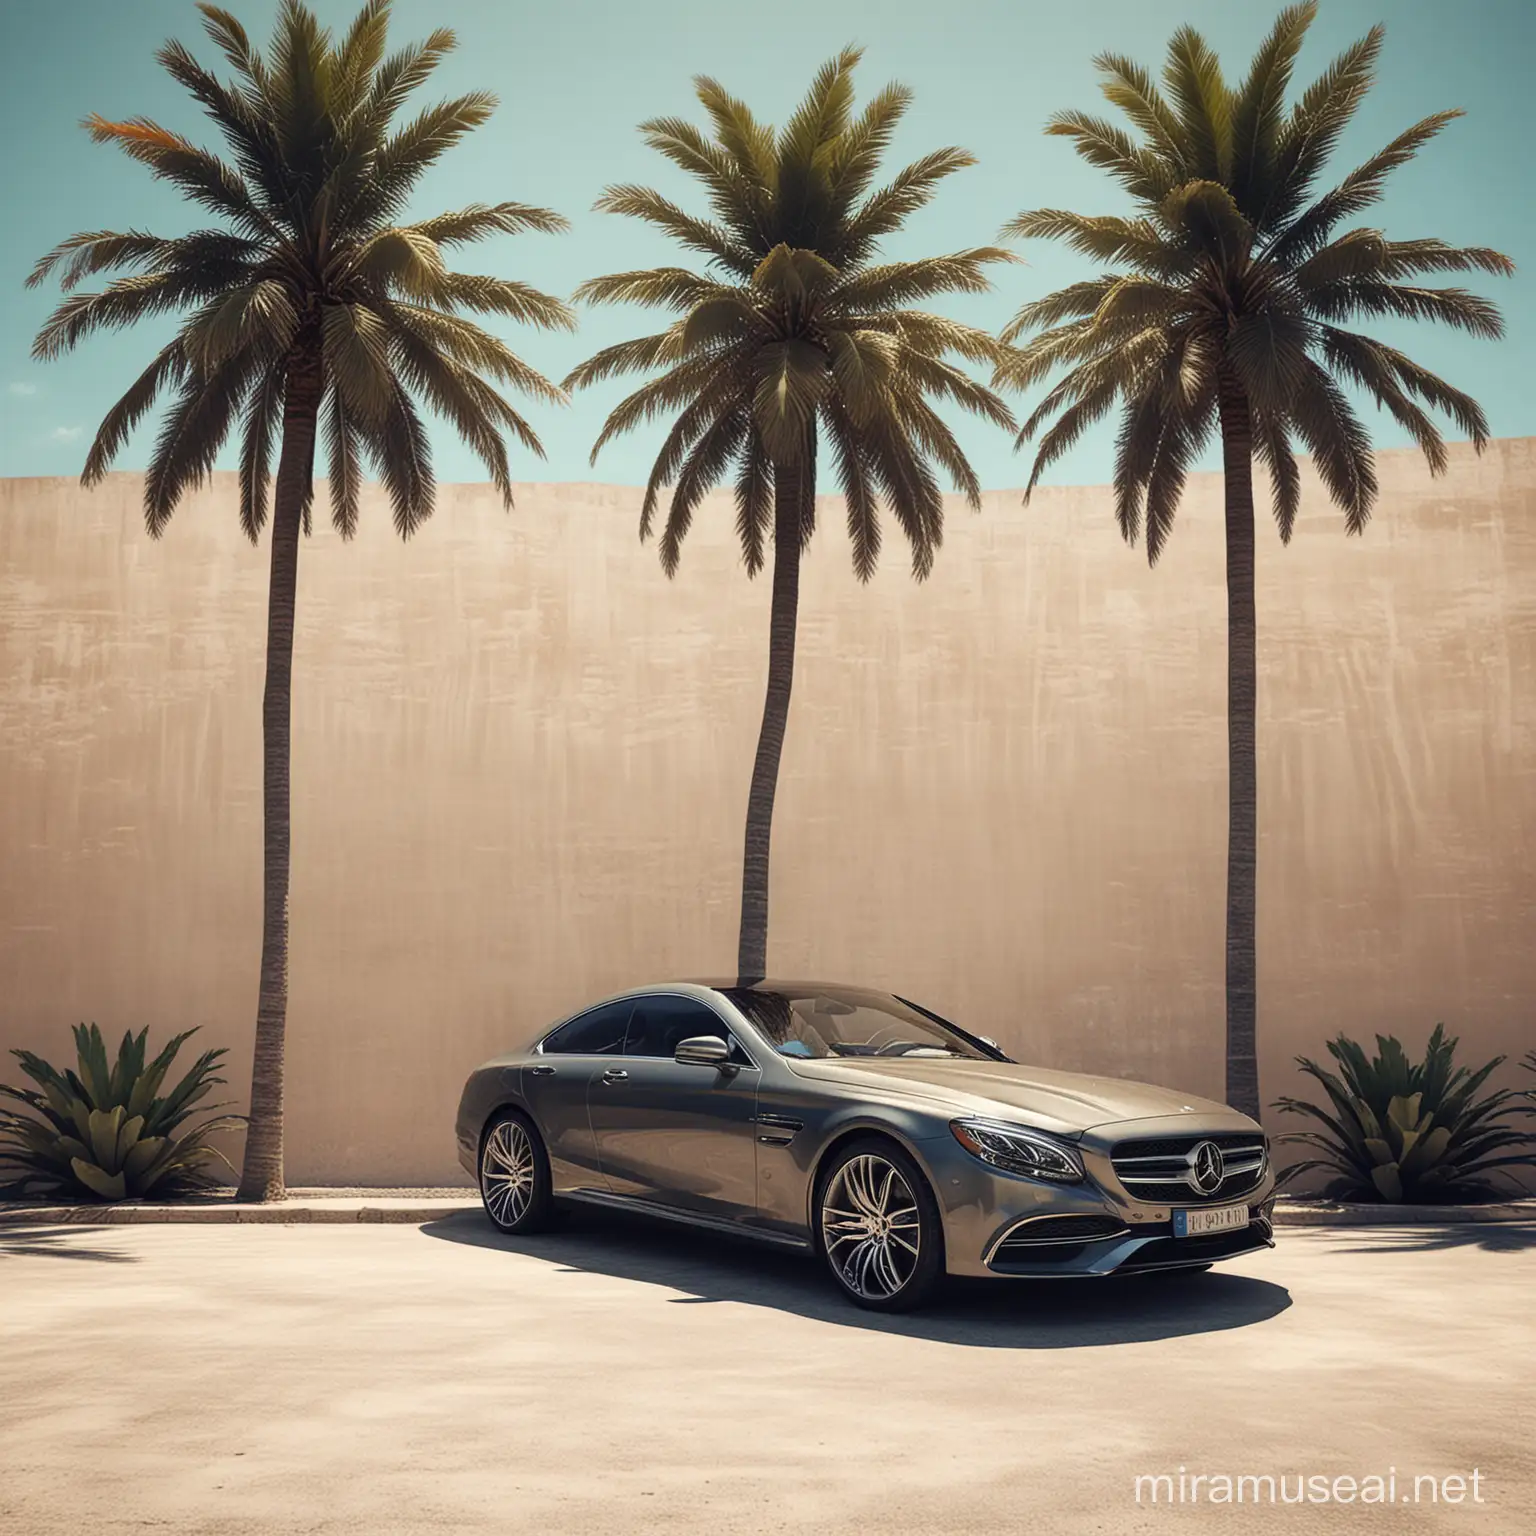 Luxury Car Parked Among Palm Trees in Summer Scene